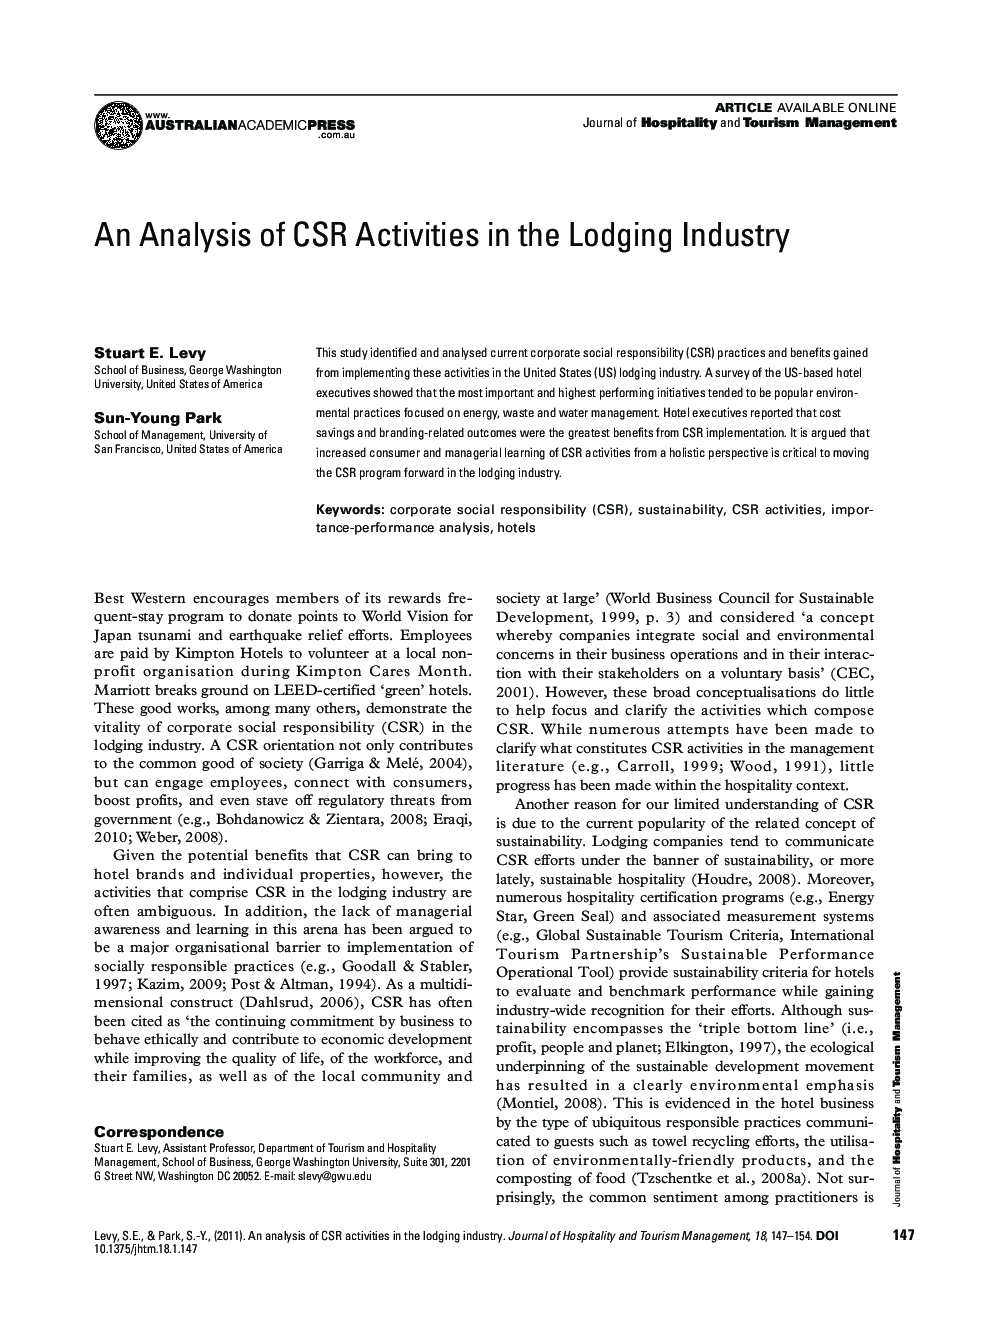 An Analysis of CSR Activities in the Lodging Industry